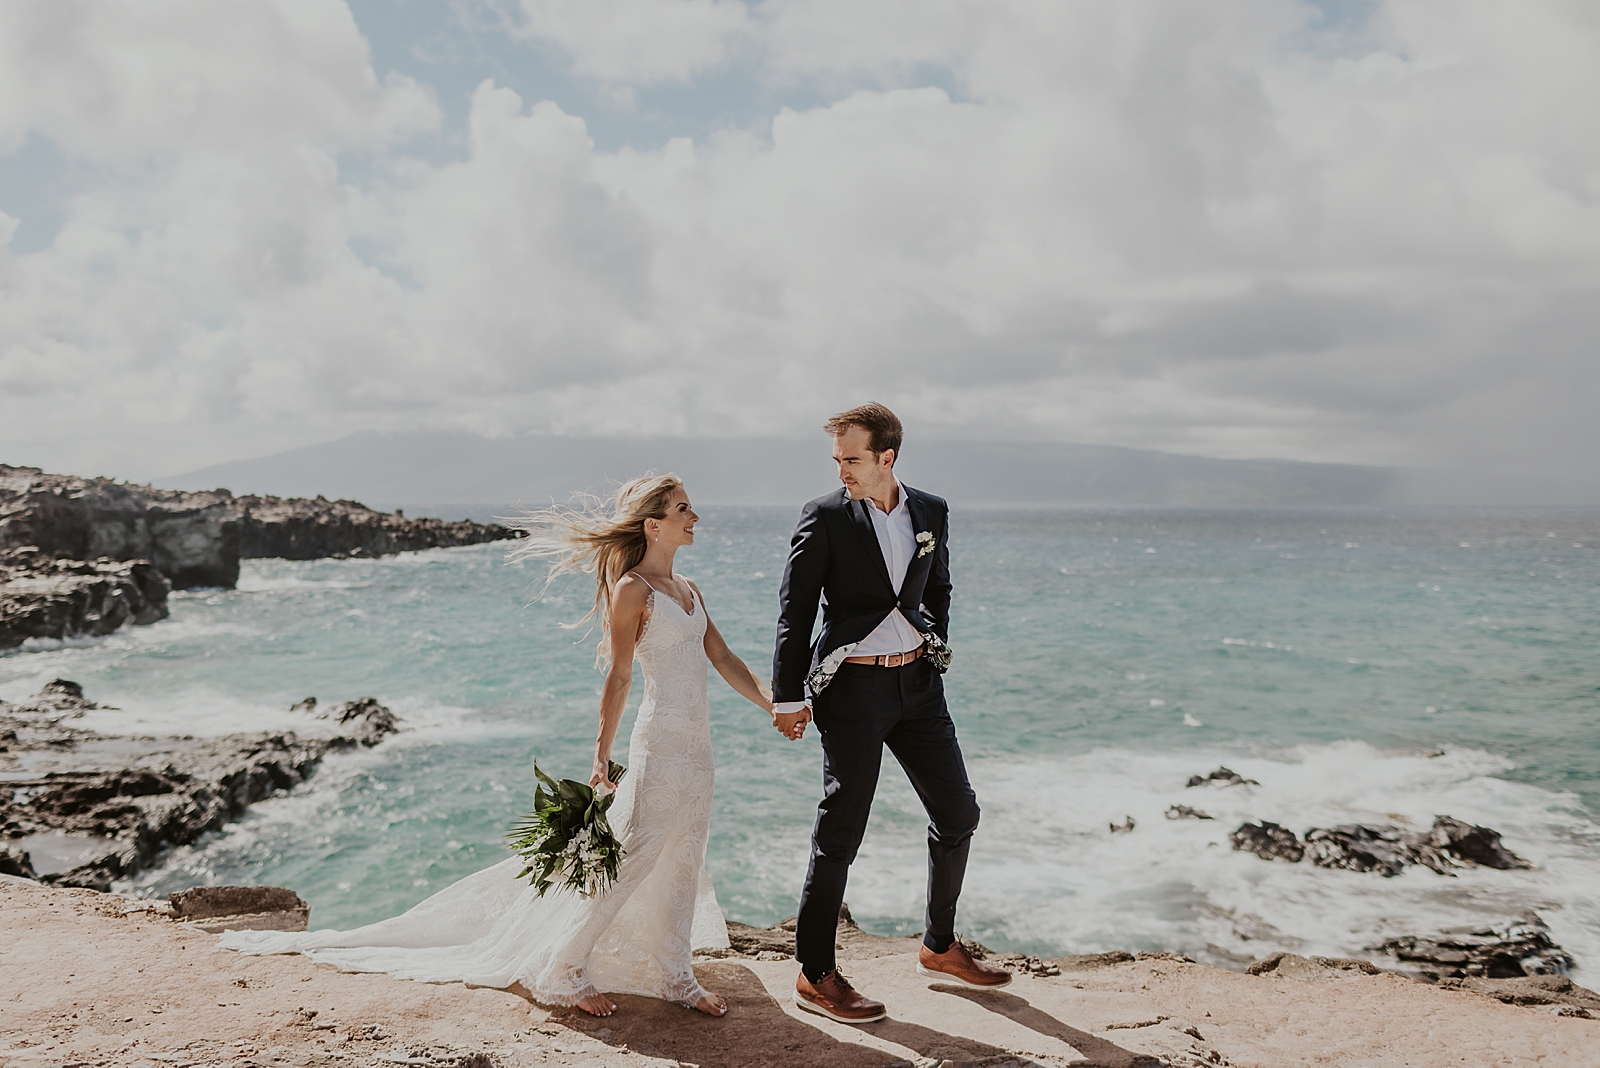 Bride and Groom holding hands as they walk by the ocean shoreline